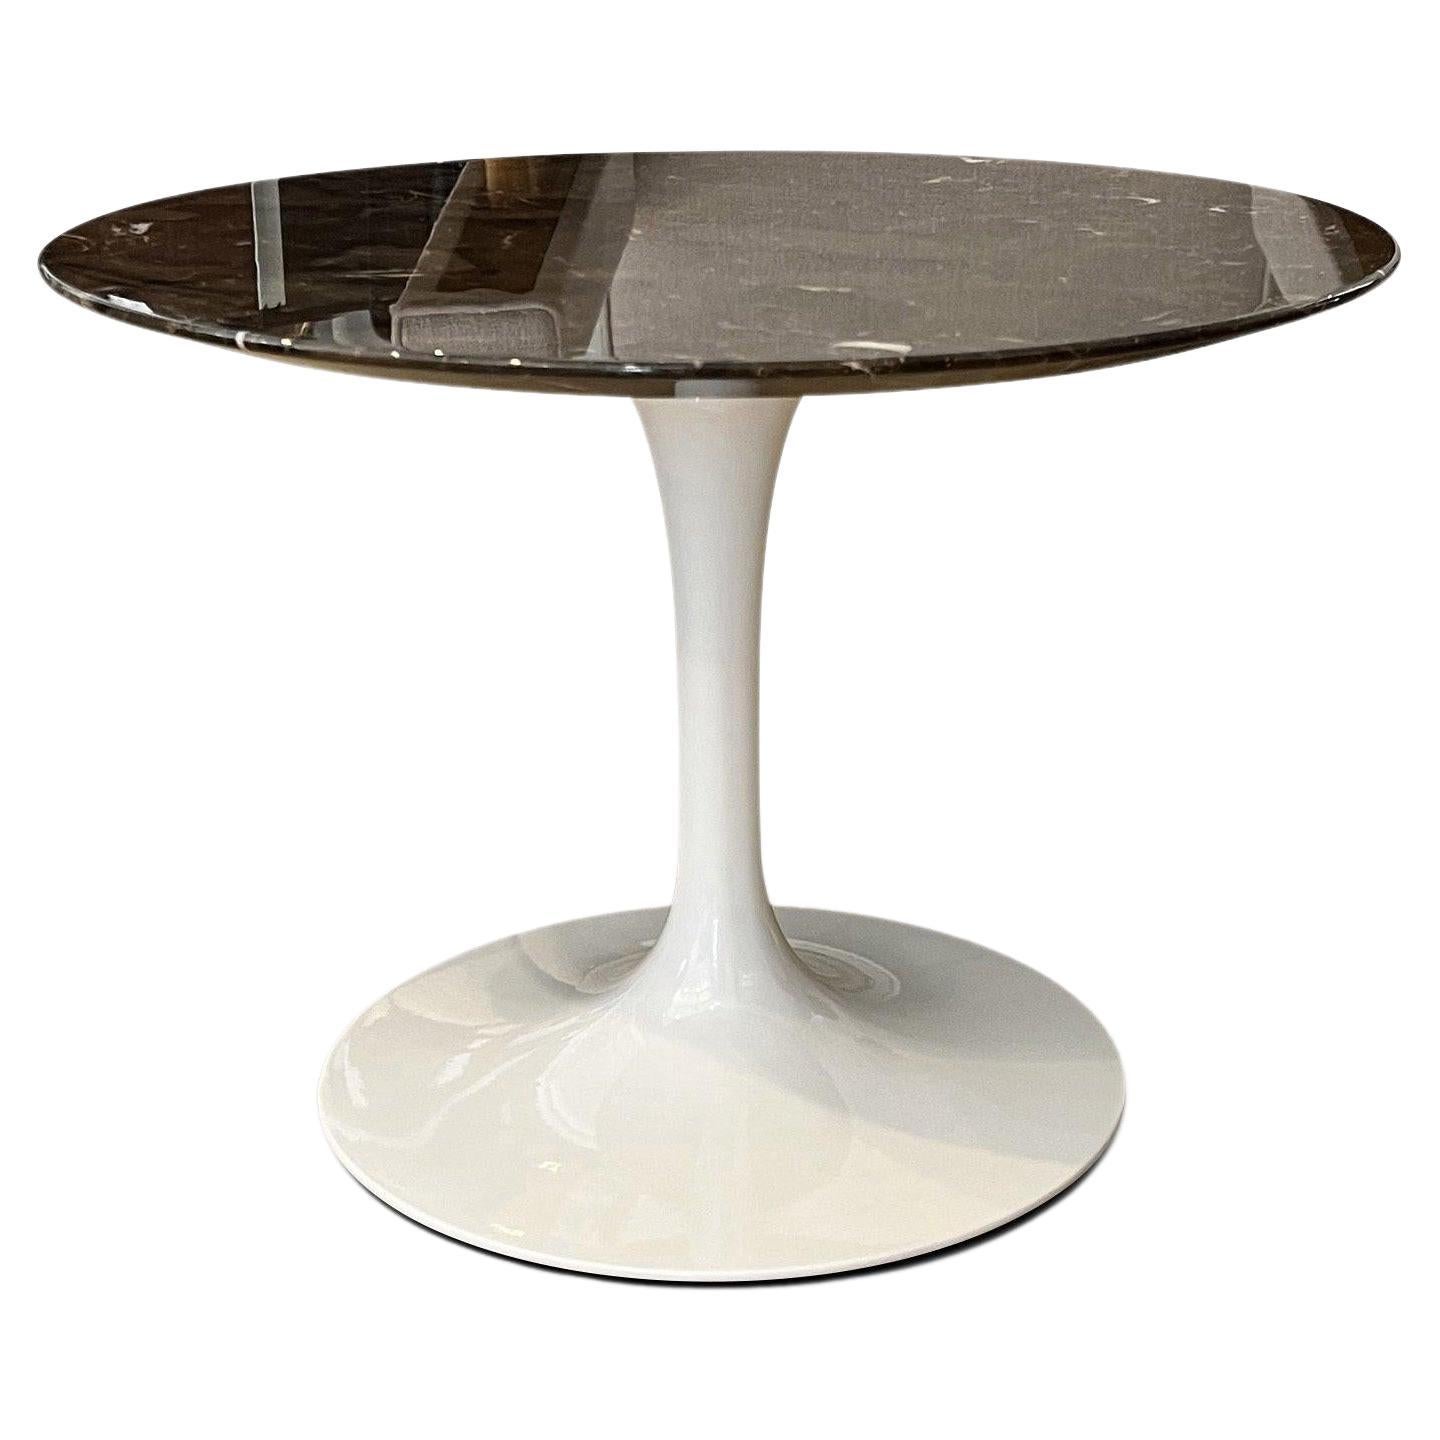 Eero Saarinen Small Round Coffee Table with Espresso Marble Top & White Base For Sale